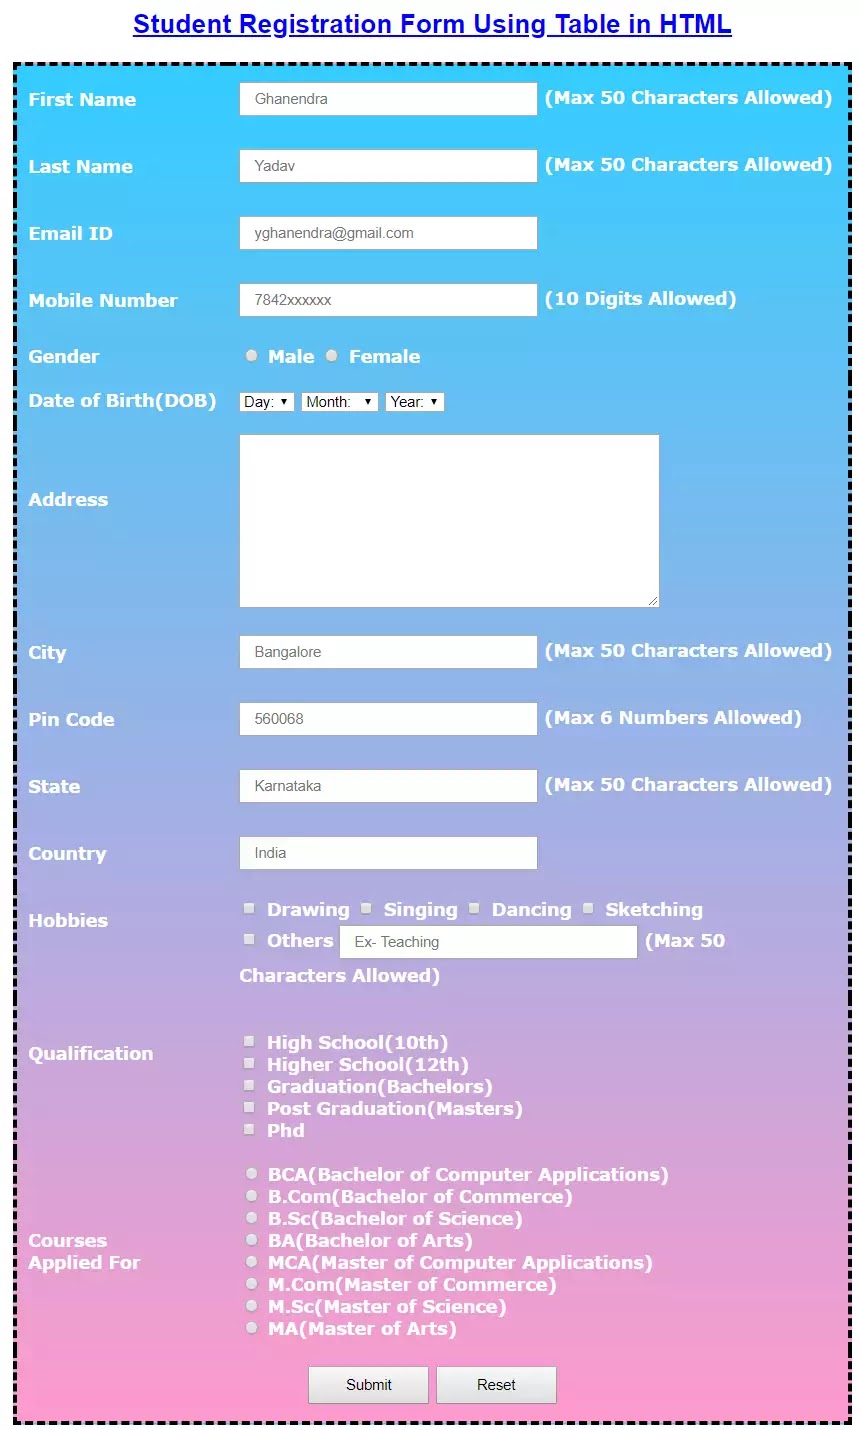 Student Registration Form in HTML and CSS